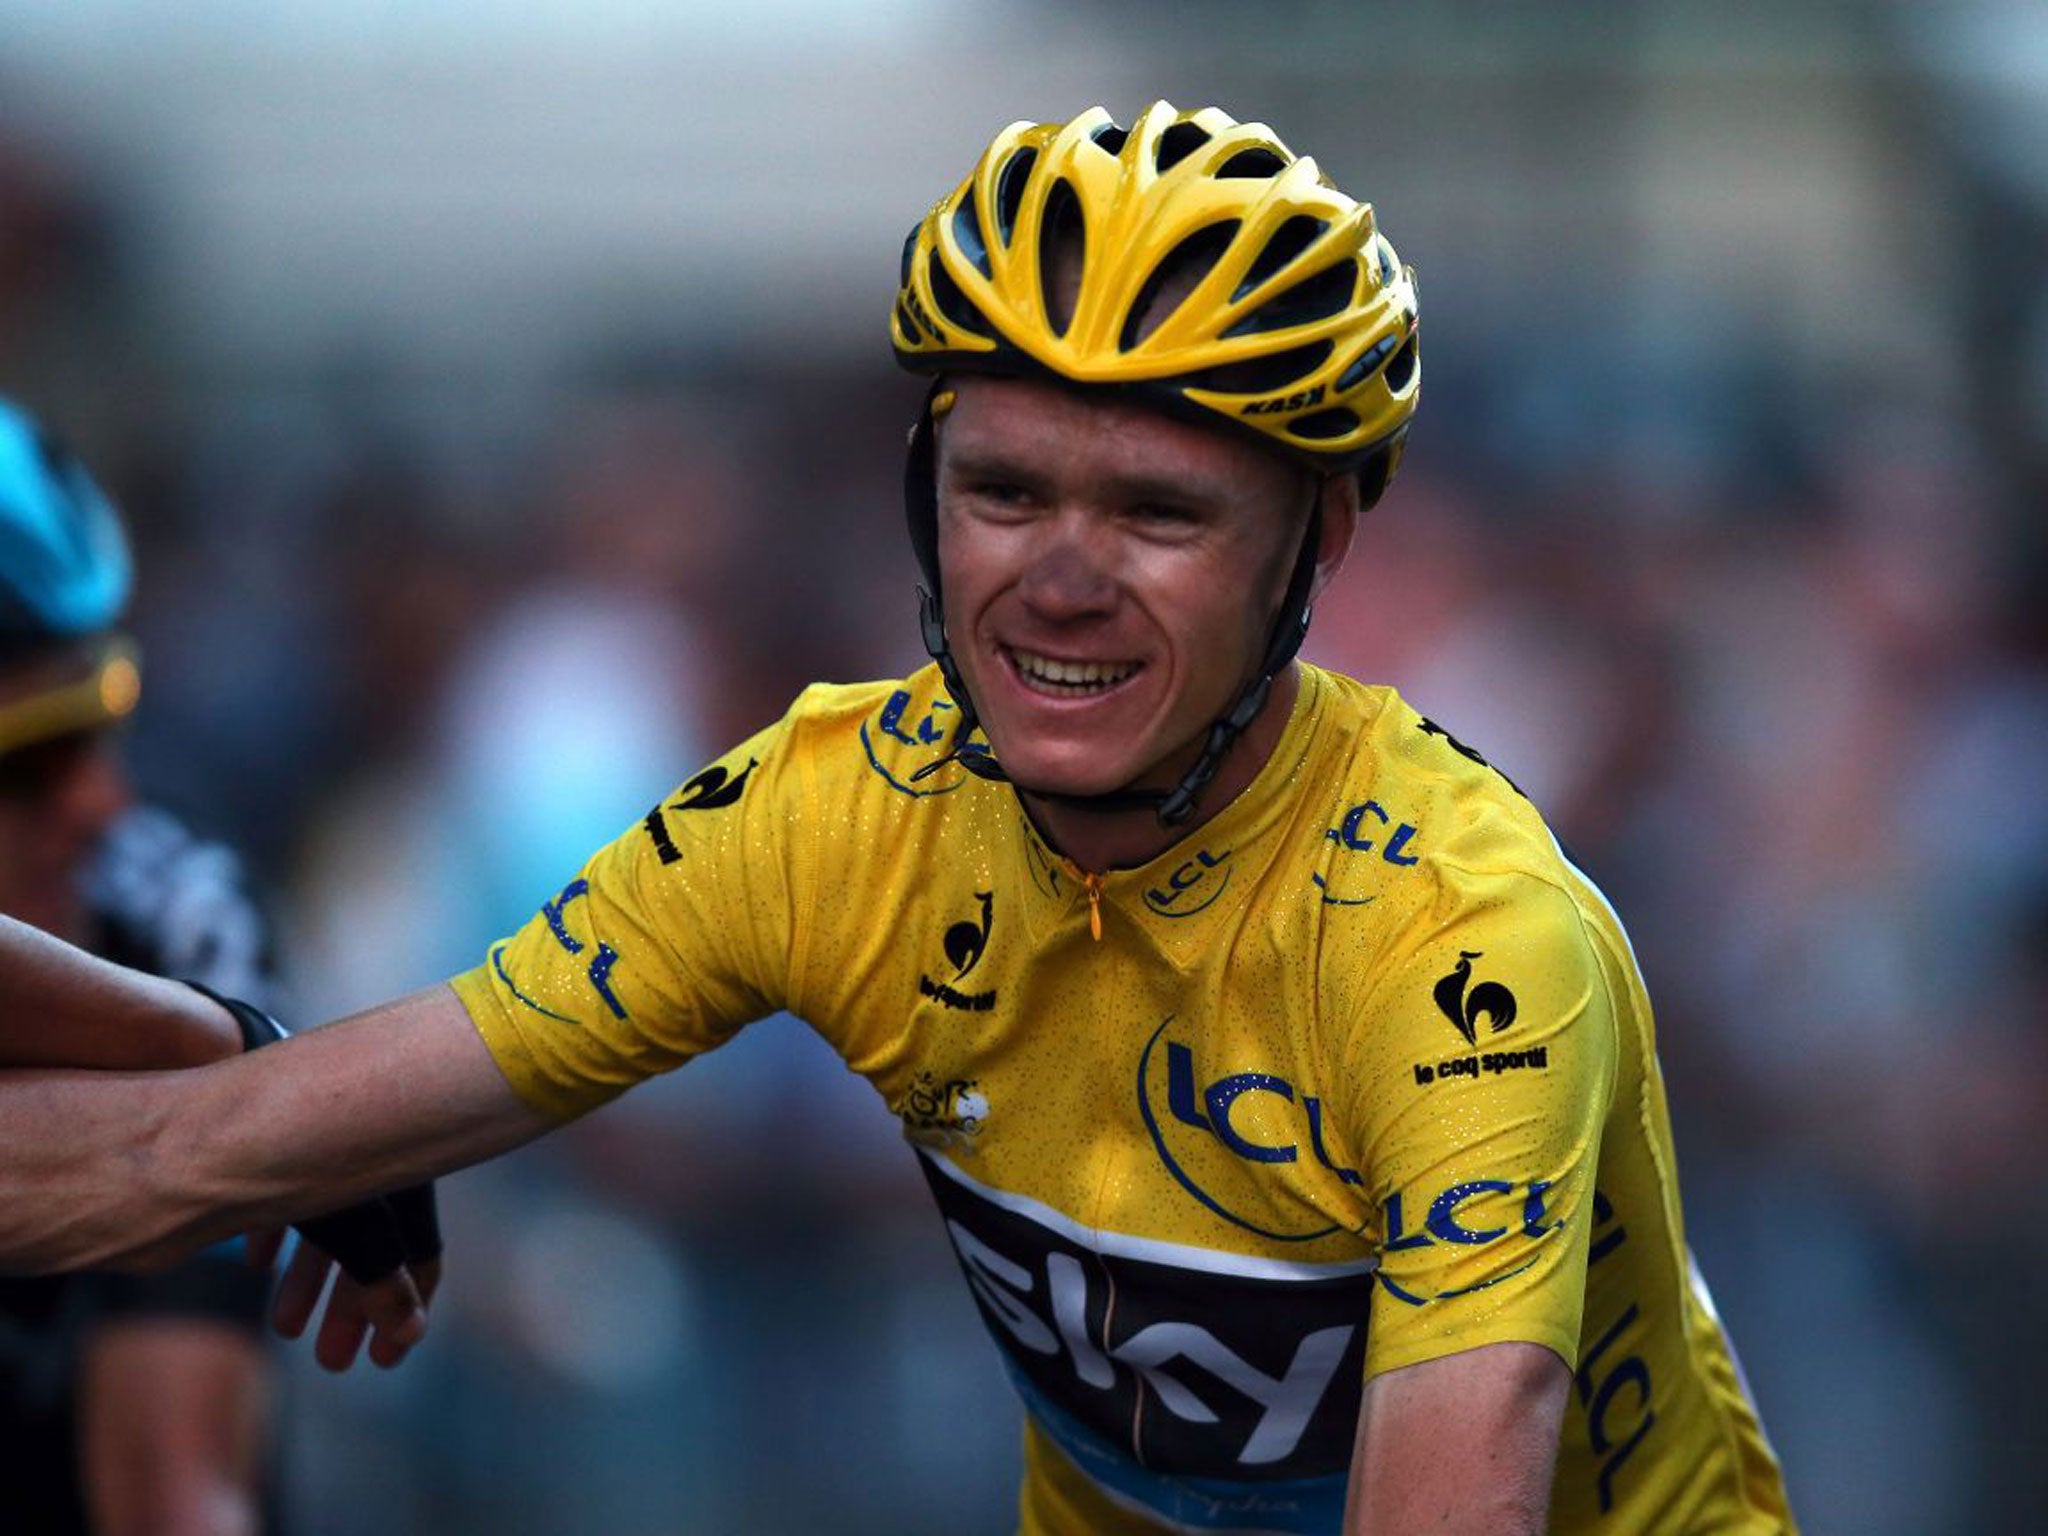 Chris Froome will contest the USA Pro Challenge